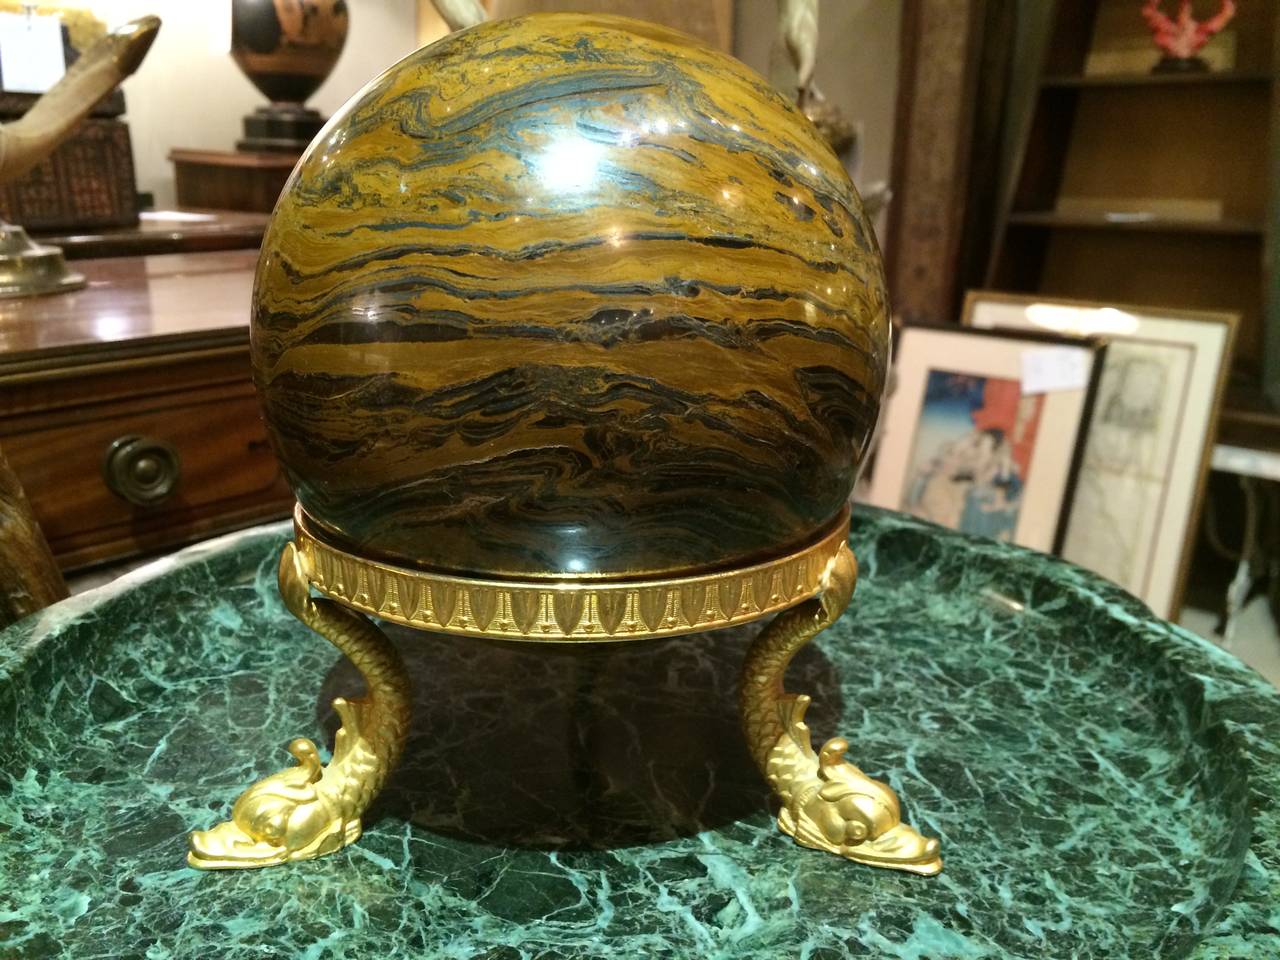 A handsome marble agate-like orb on a Italian neoclassical style gilt bronze tripod stand with three dolphin supports.